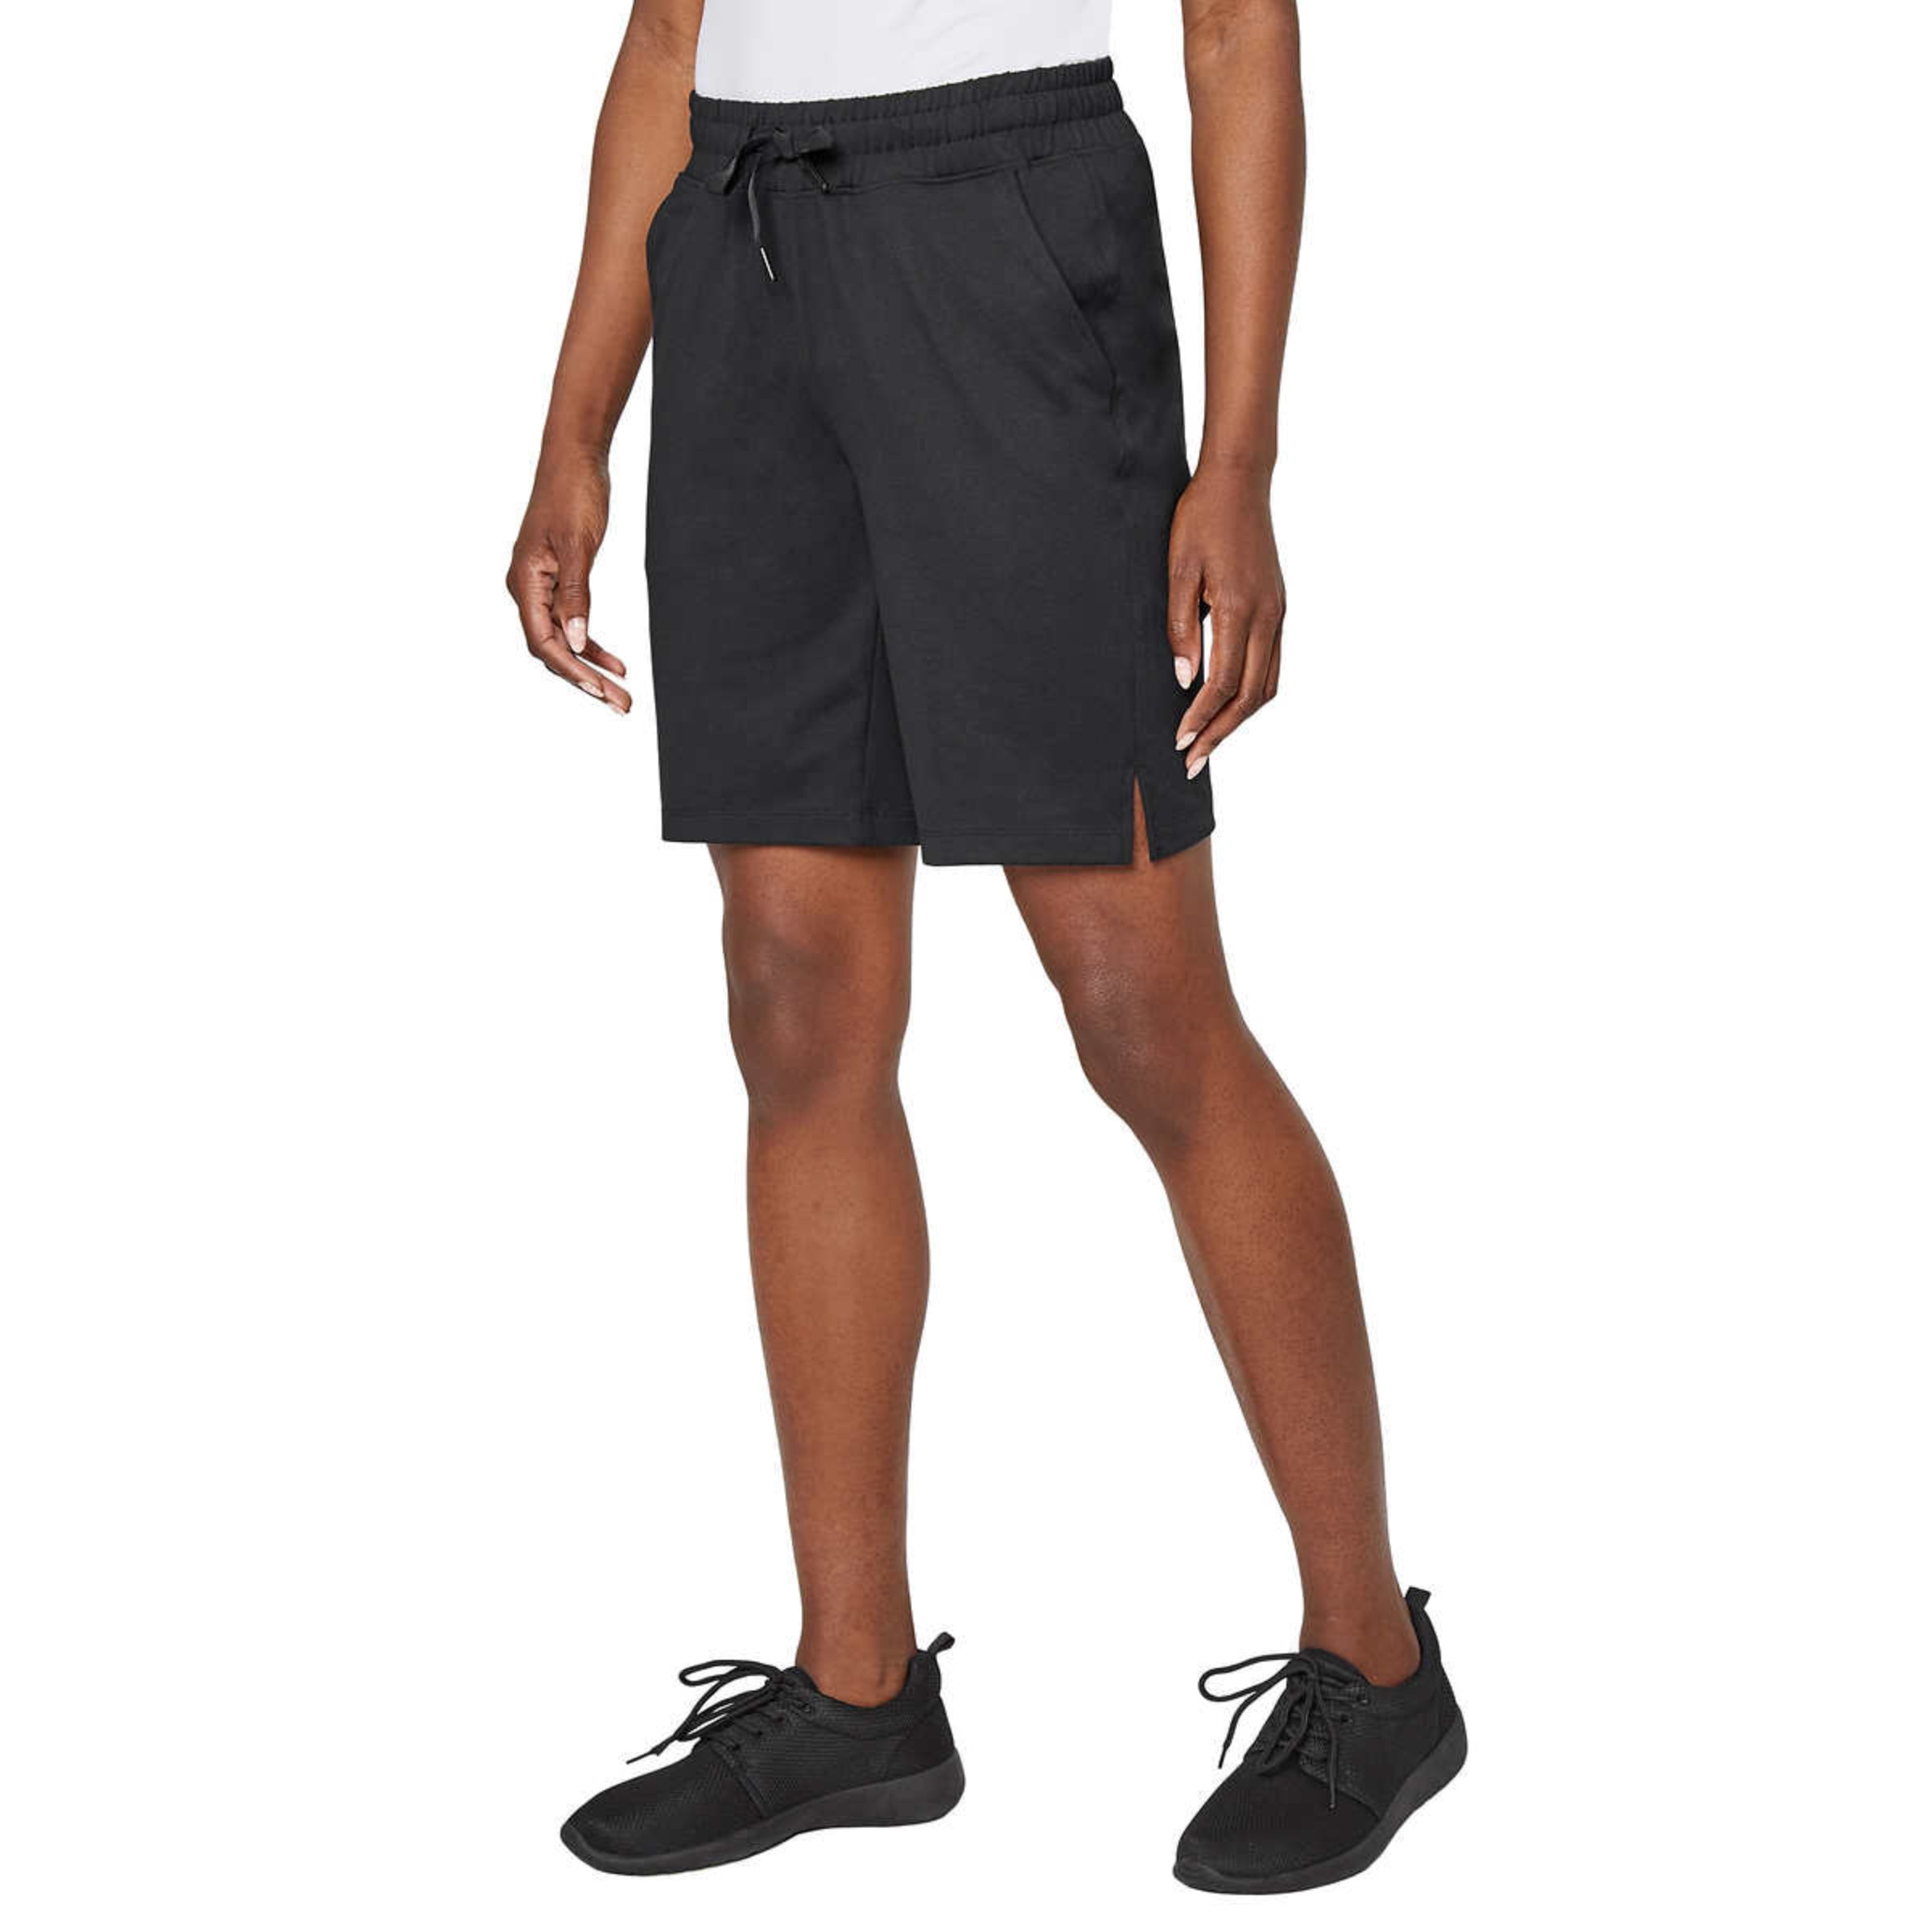 Mondetta Performance Luxury Shorts, Description: Moisture wicking Elastic  waistband rolled hem comfortable brand new with tags.